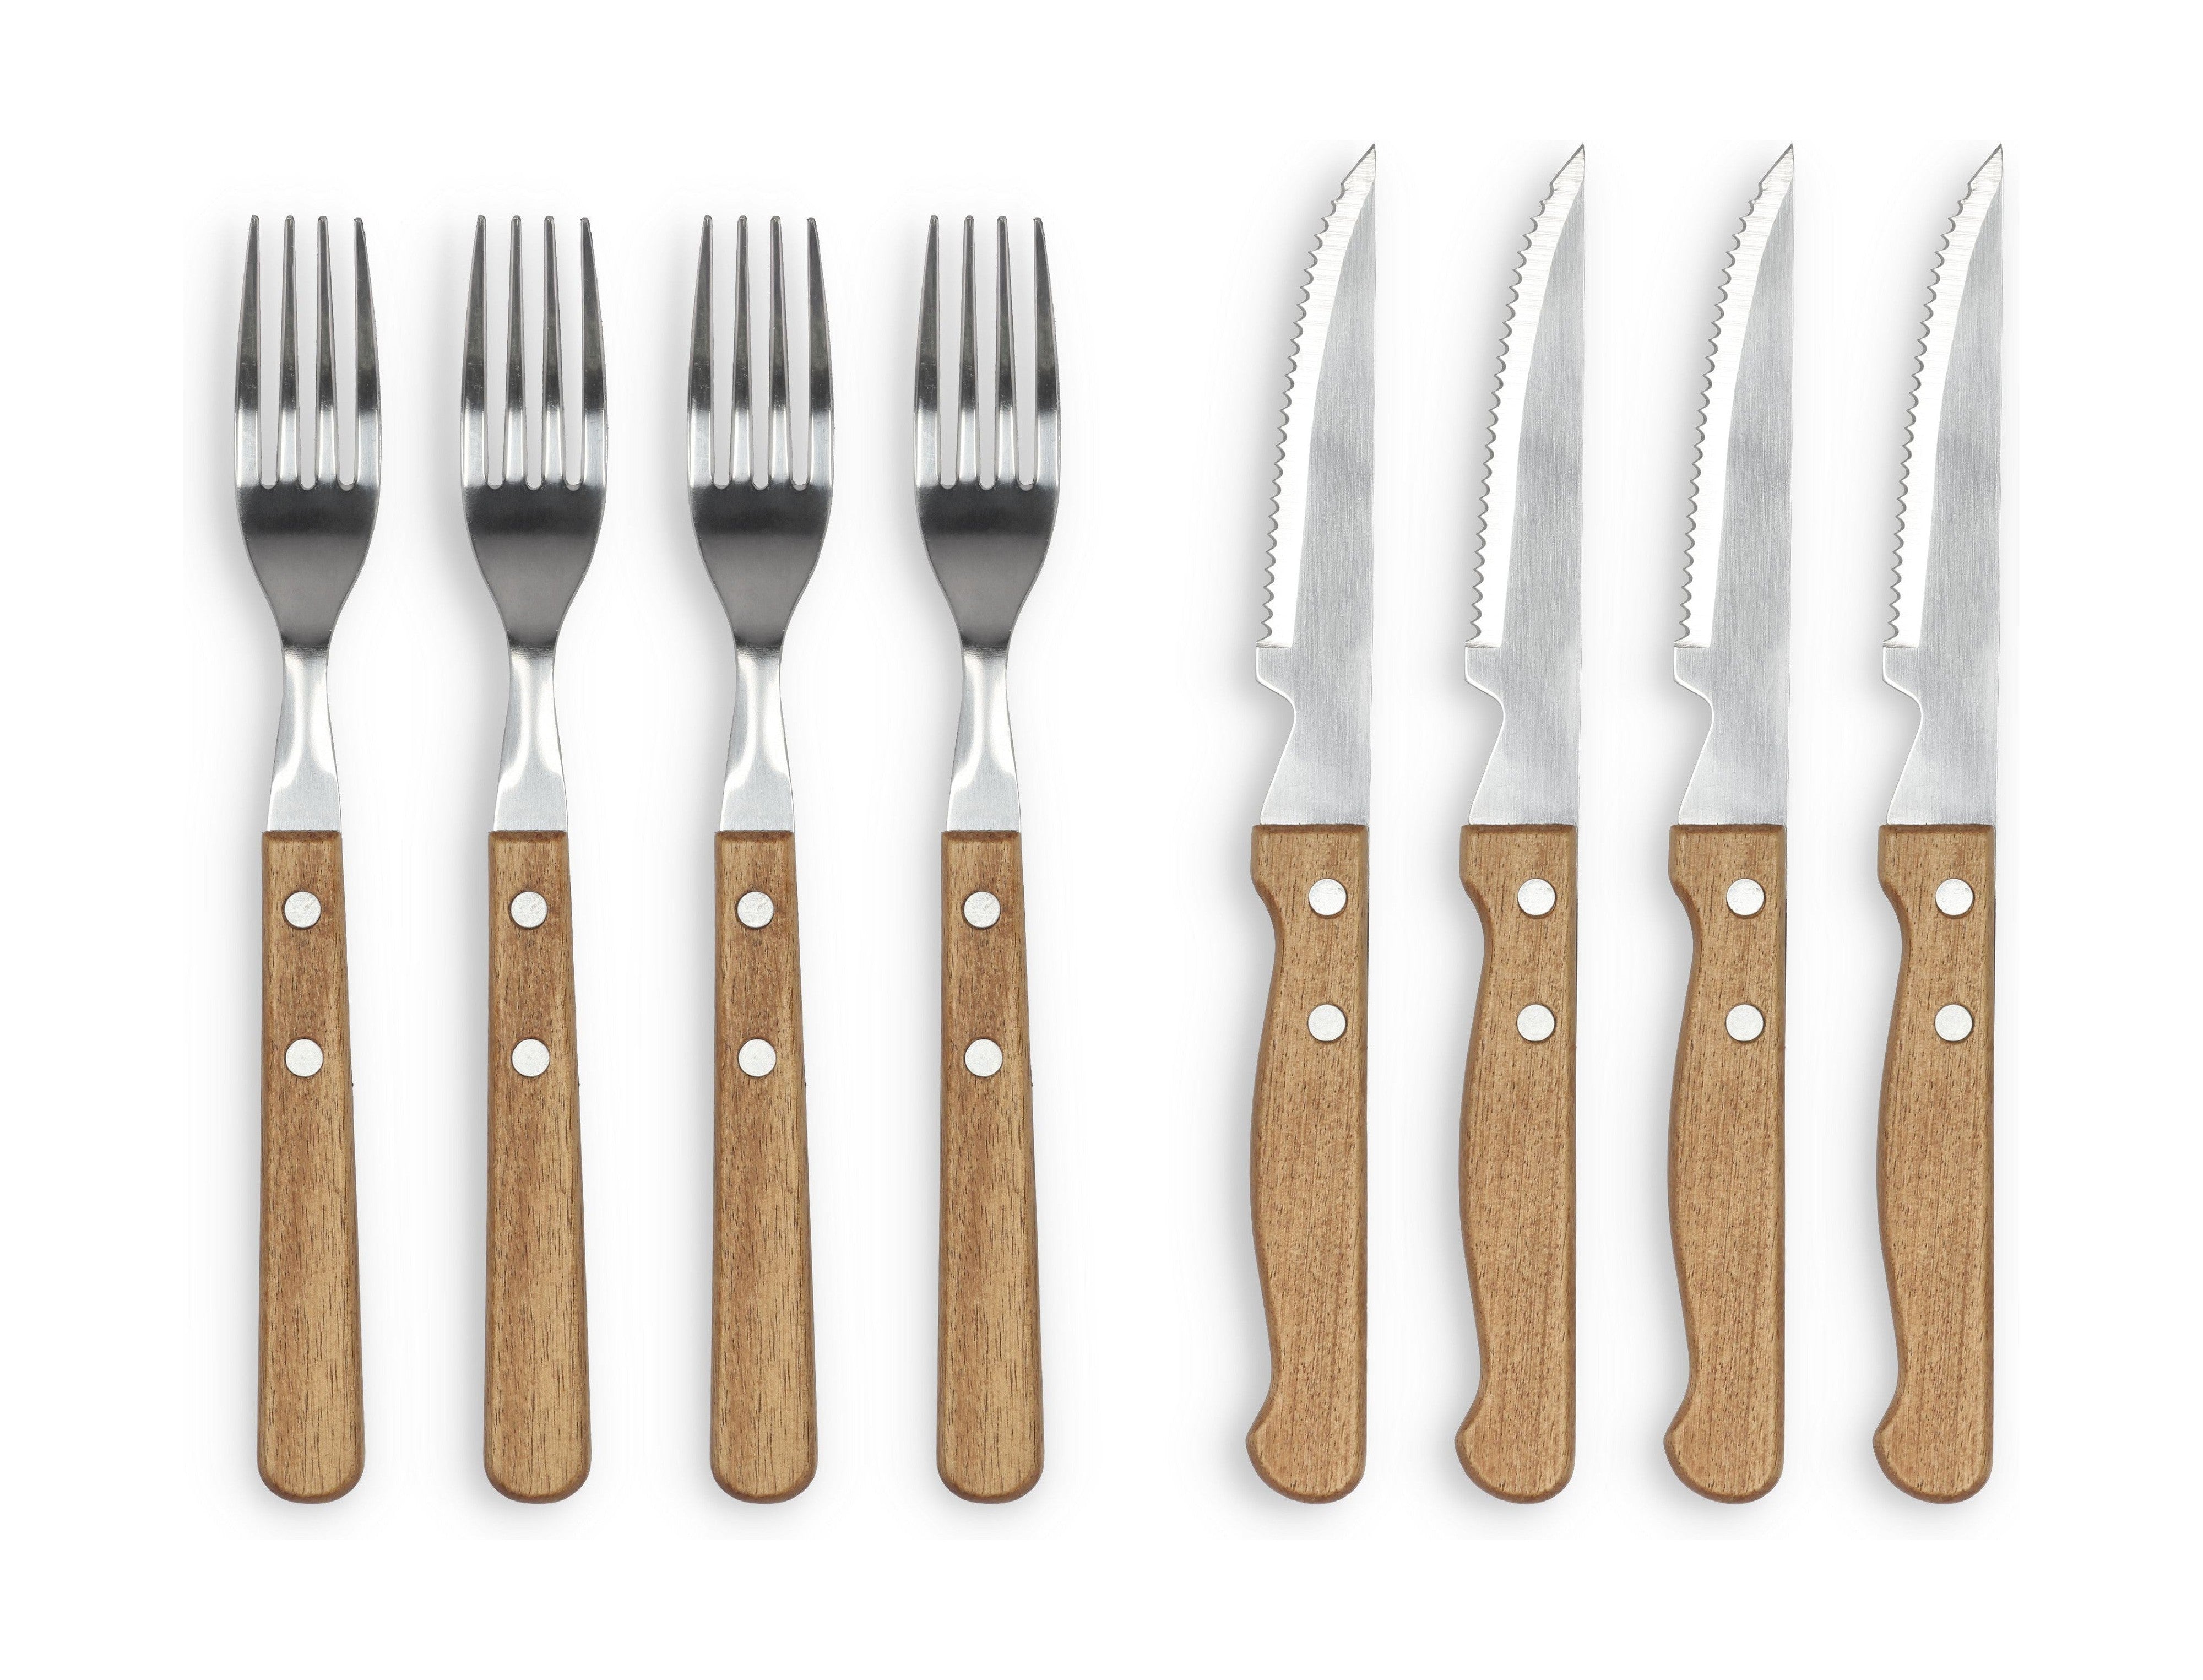 A Holm Steak Cutlery Set With 8 Pieces on a white background.